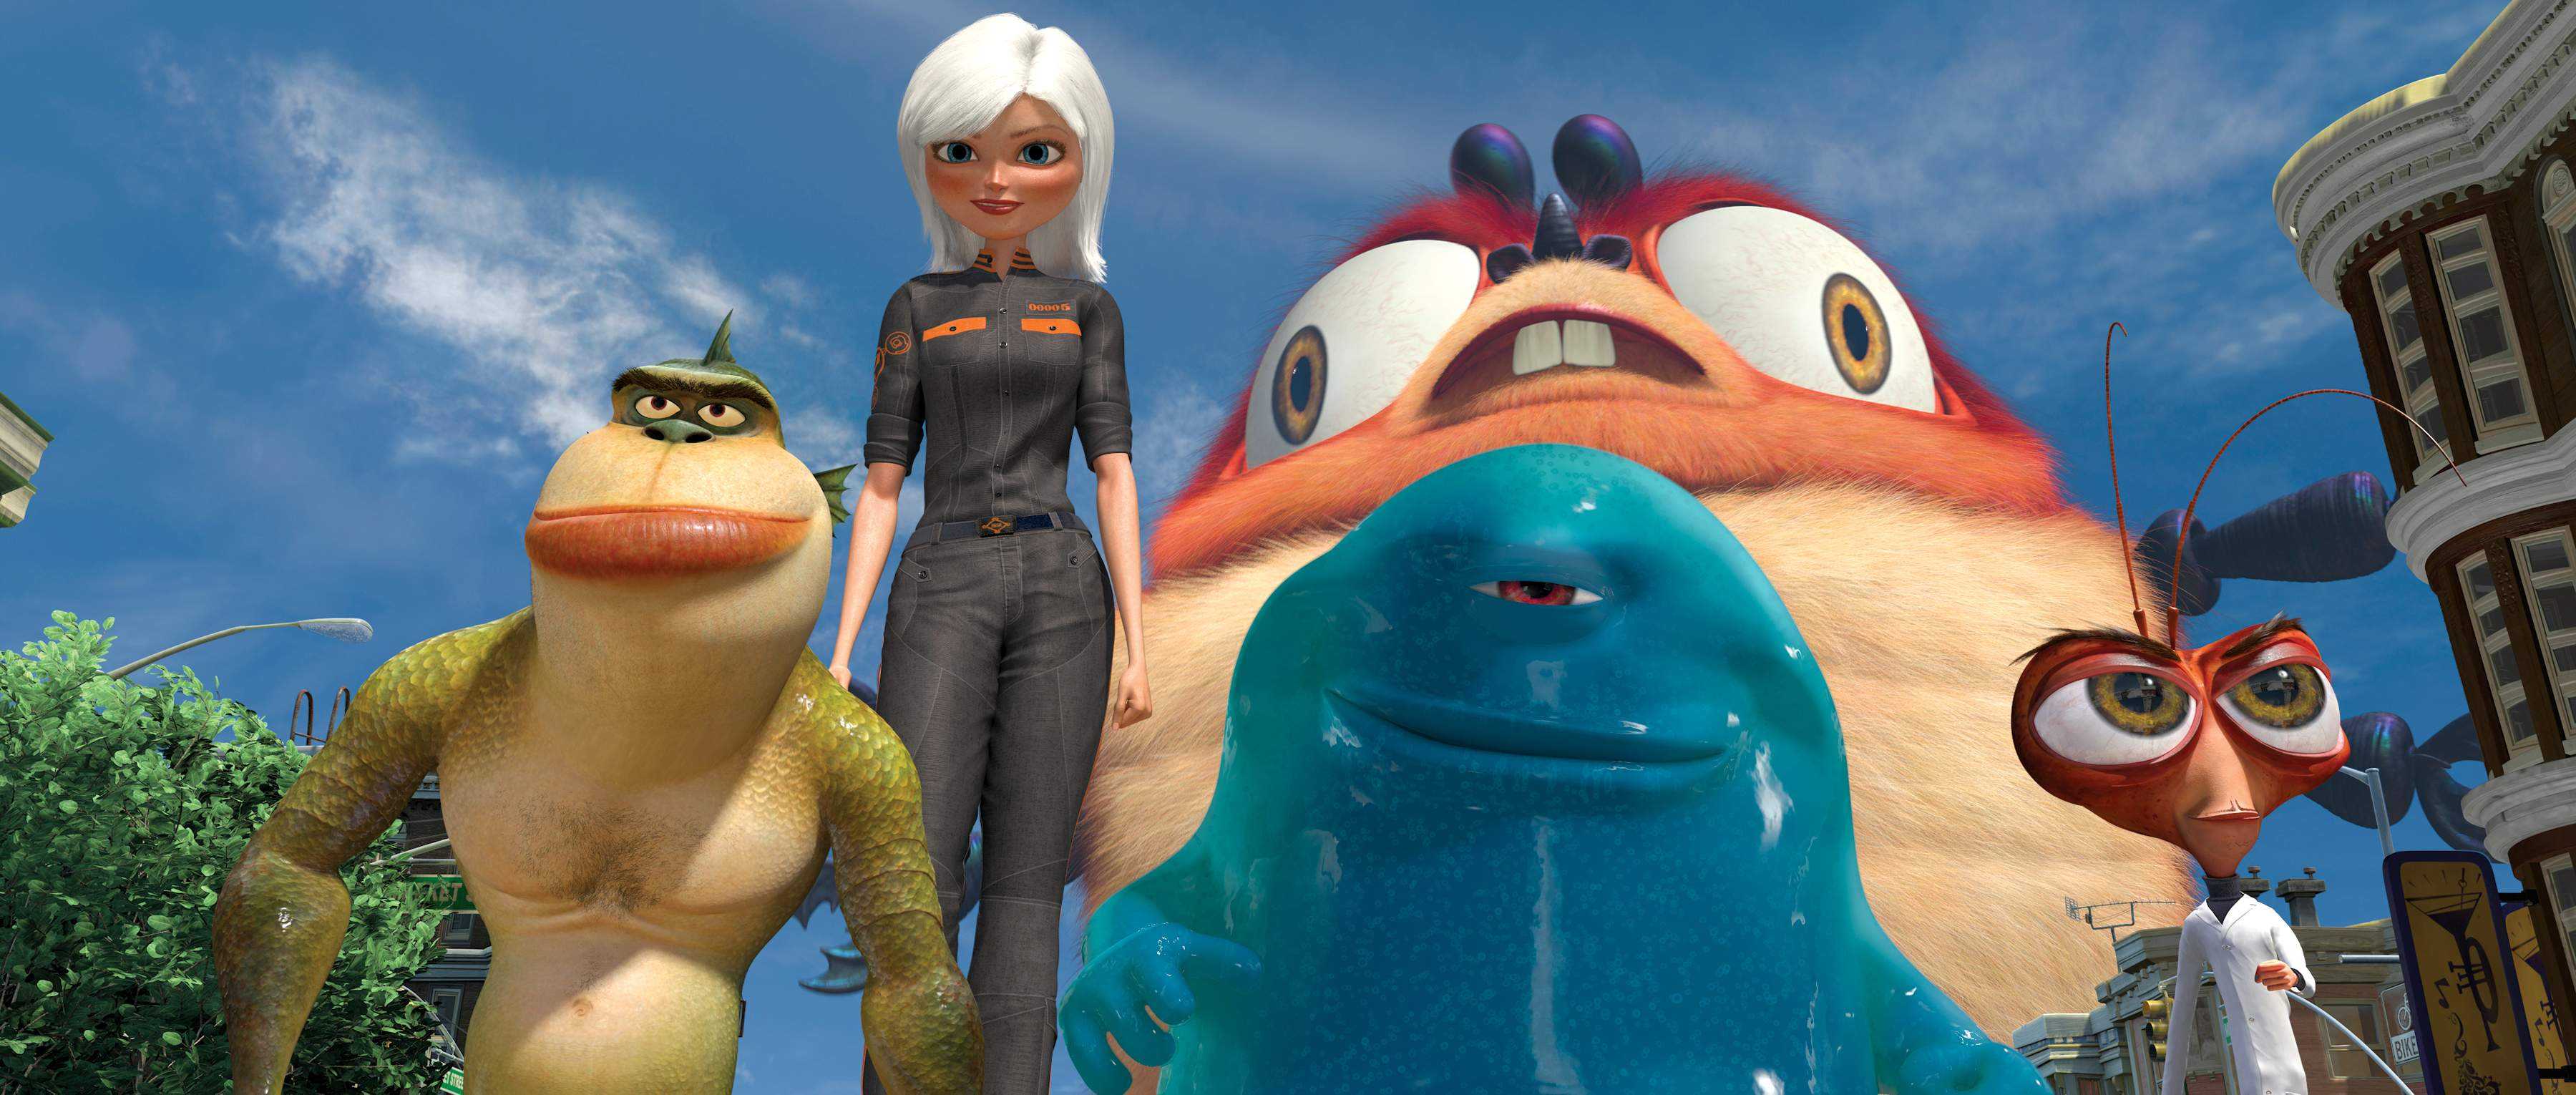 HD Quality Wallpaper | Collection: Movie, 3600x1530 Monsters Vs Aliens